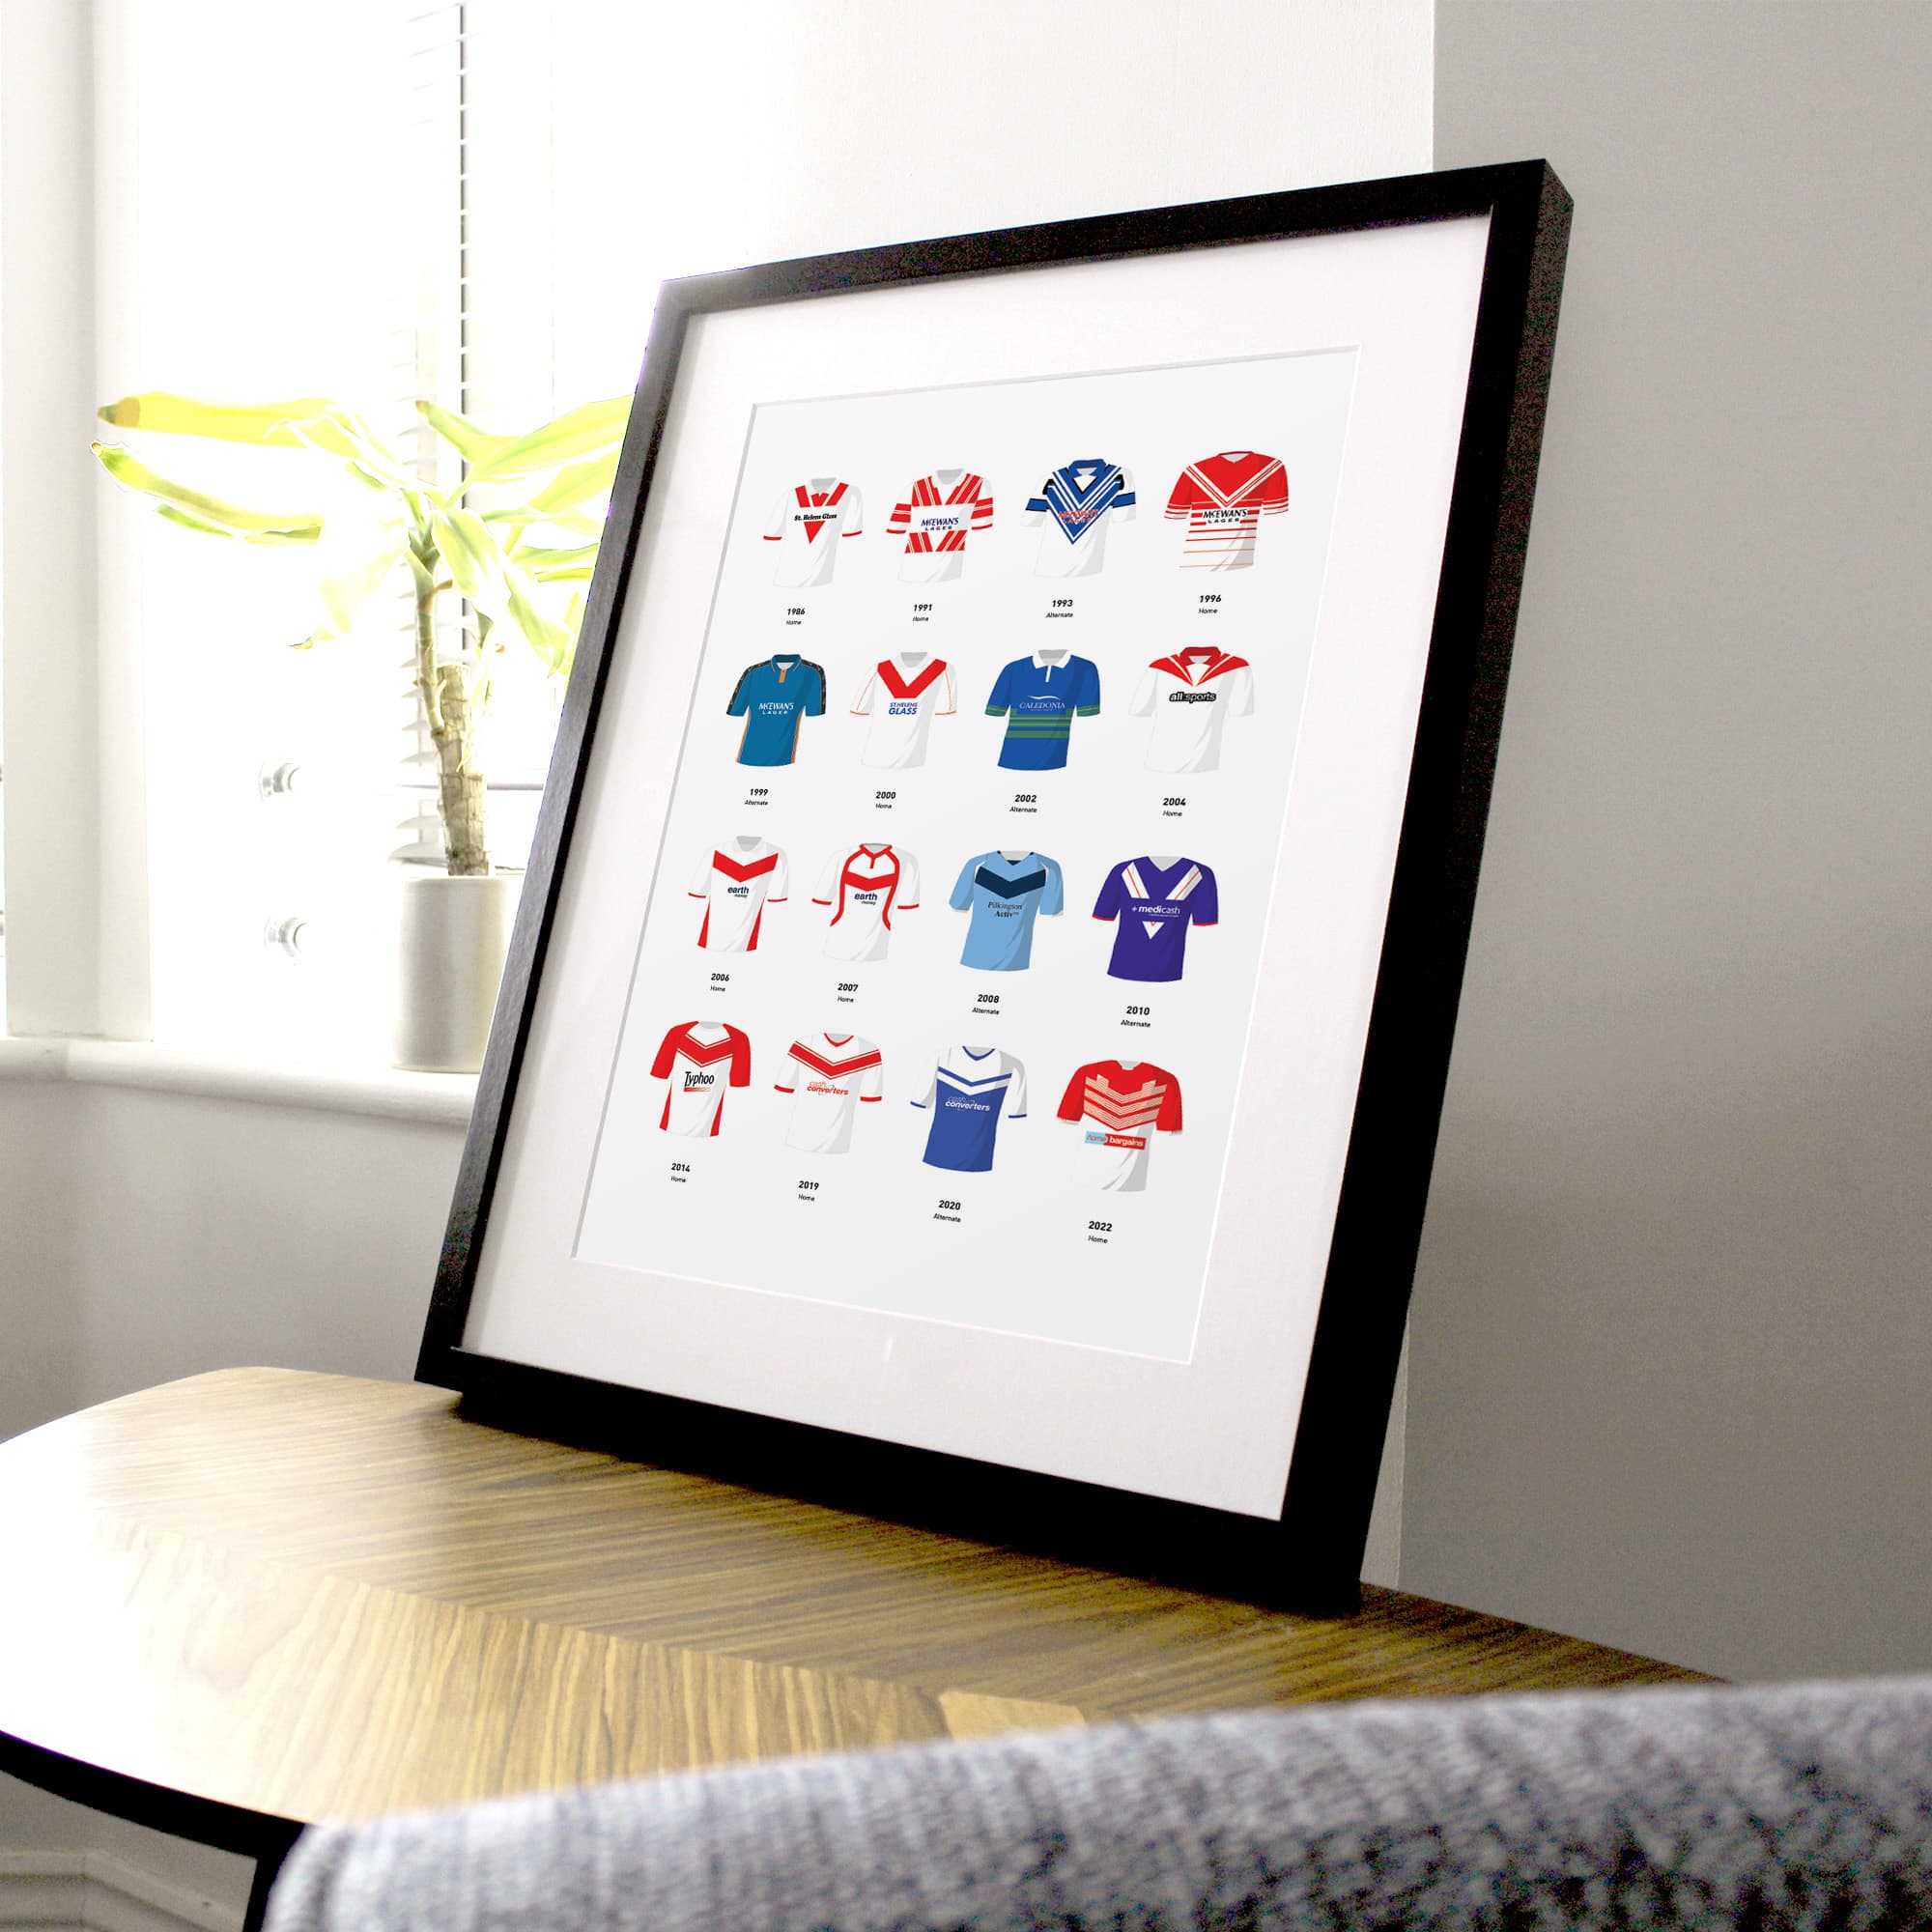 St Helens Classic Kits Rugby League Team Print